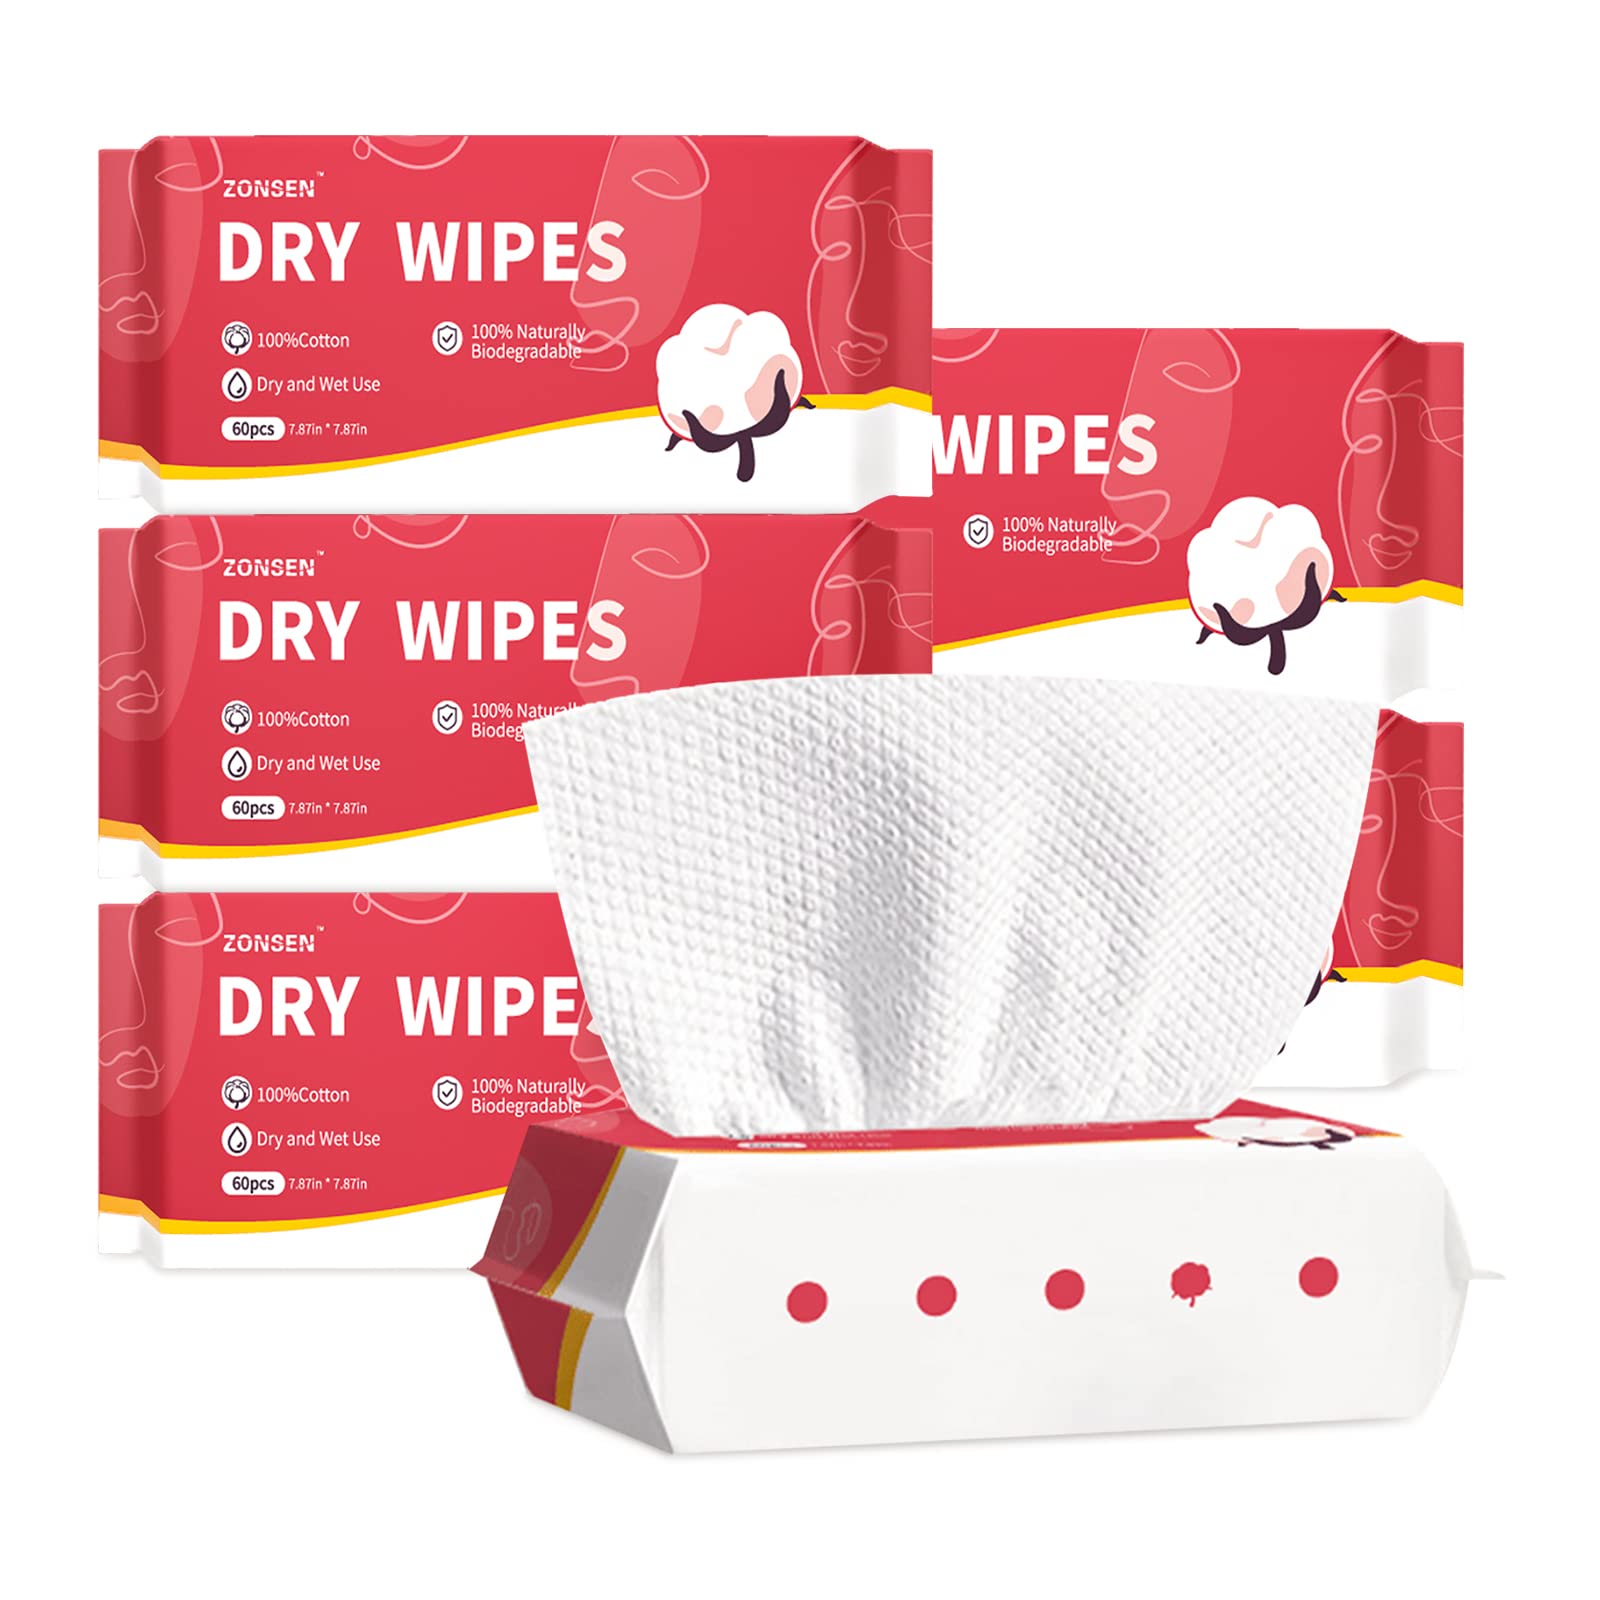 Disposable Face Towel, ZONSEN Dry Wipes Deeply Cleansing Facial Cotton Tissue, Chemical-Free Unscented Biodegradable Ultra Soft Cotton Wipes, Extra Thick Lint Free for Sensitive Skin, 360 Count